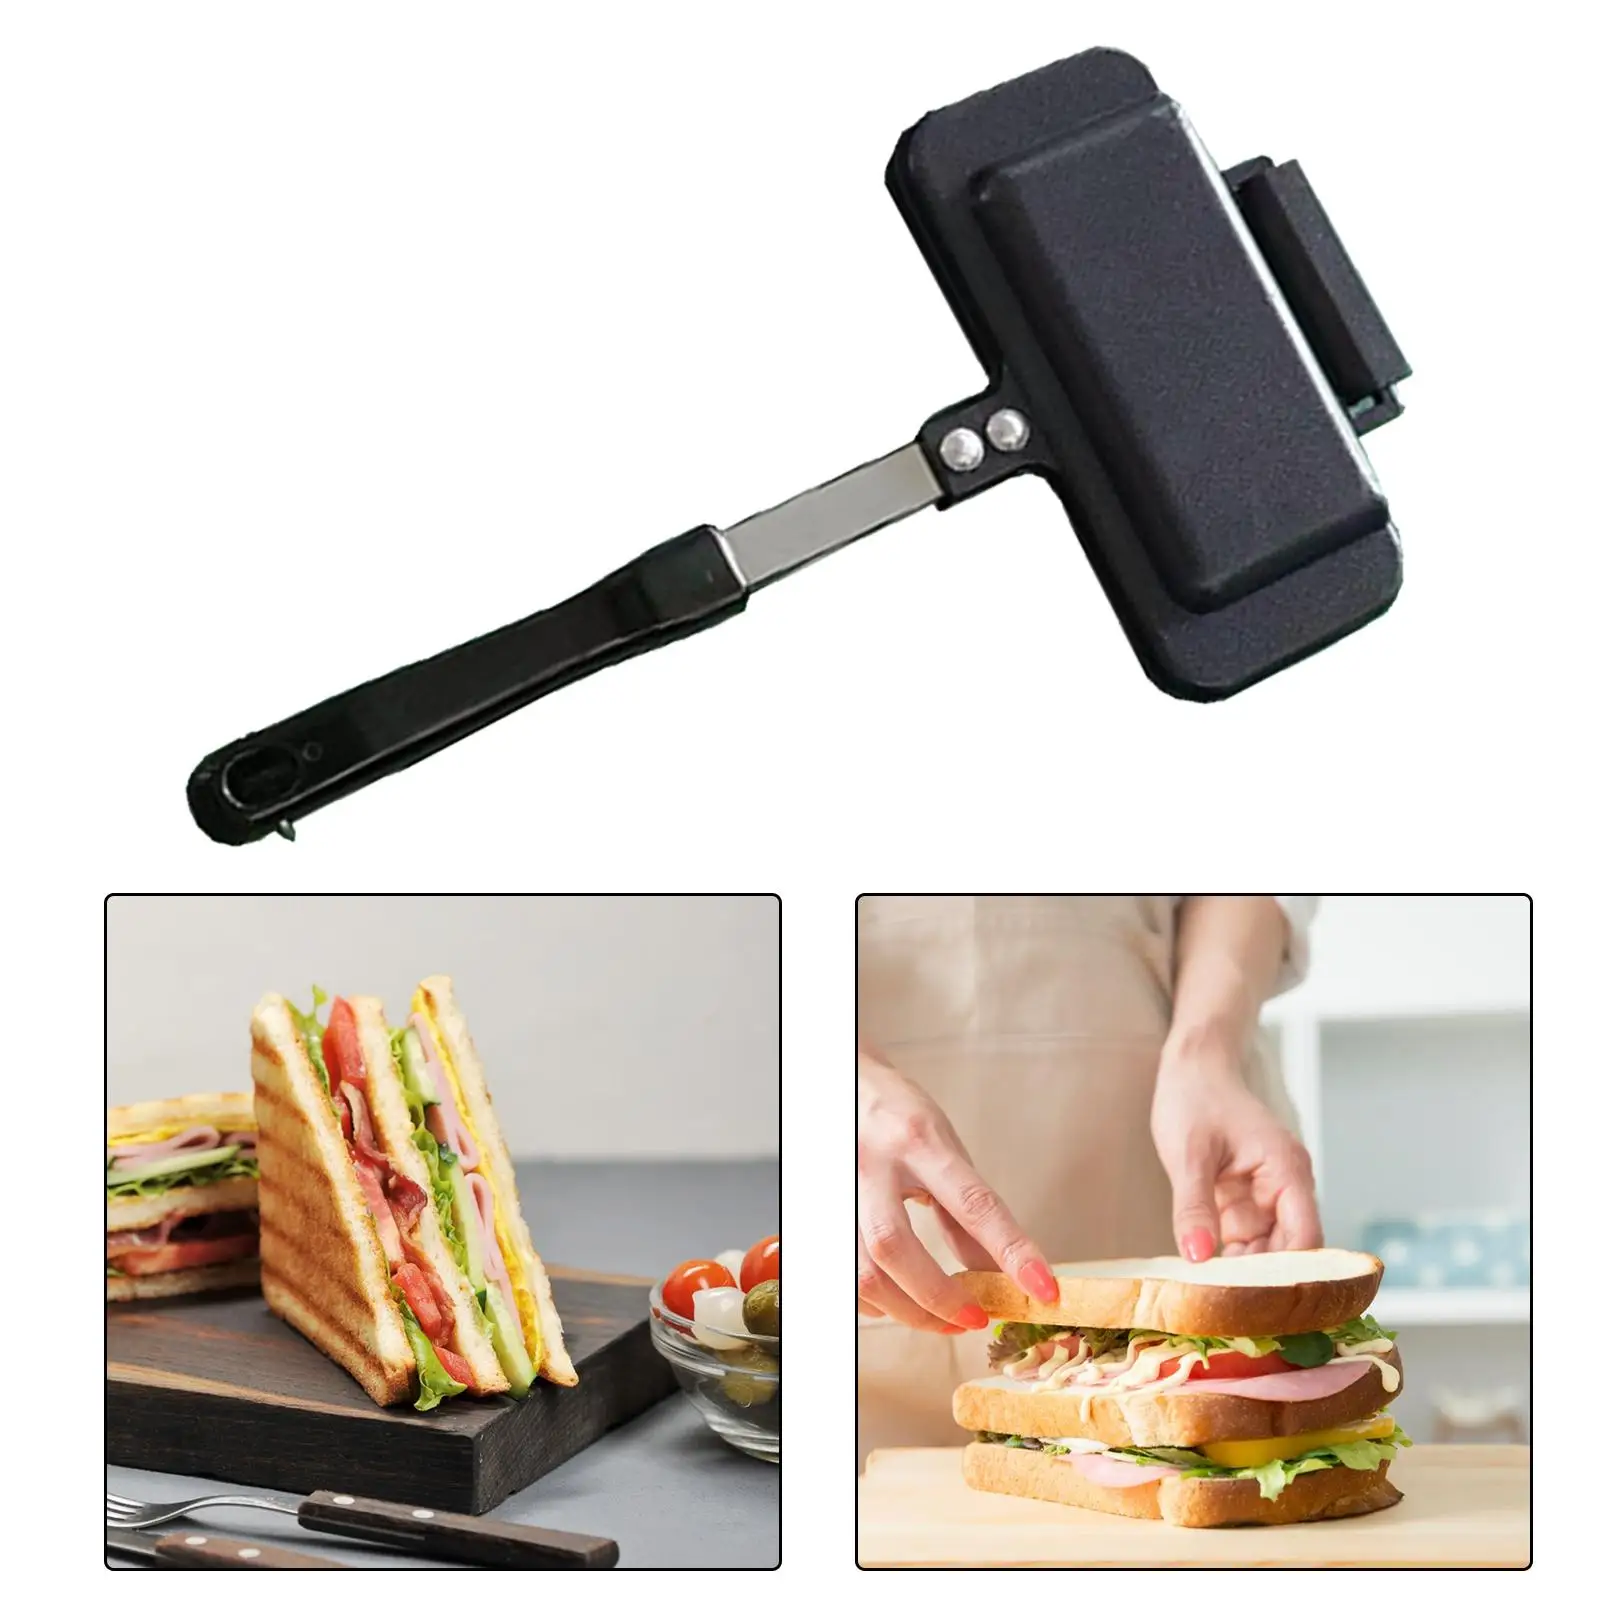 Double Sided Frying Pan Breakfast Sandwich Maker Waffle Pancake Snack Griddle Pan for Frittatas Toast Omelets Bread Dining Room